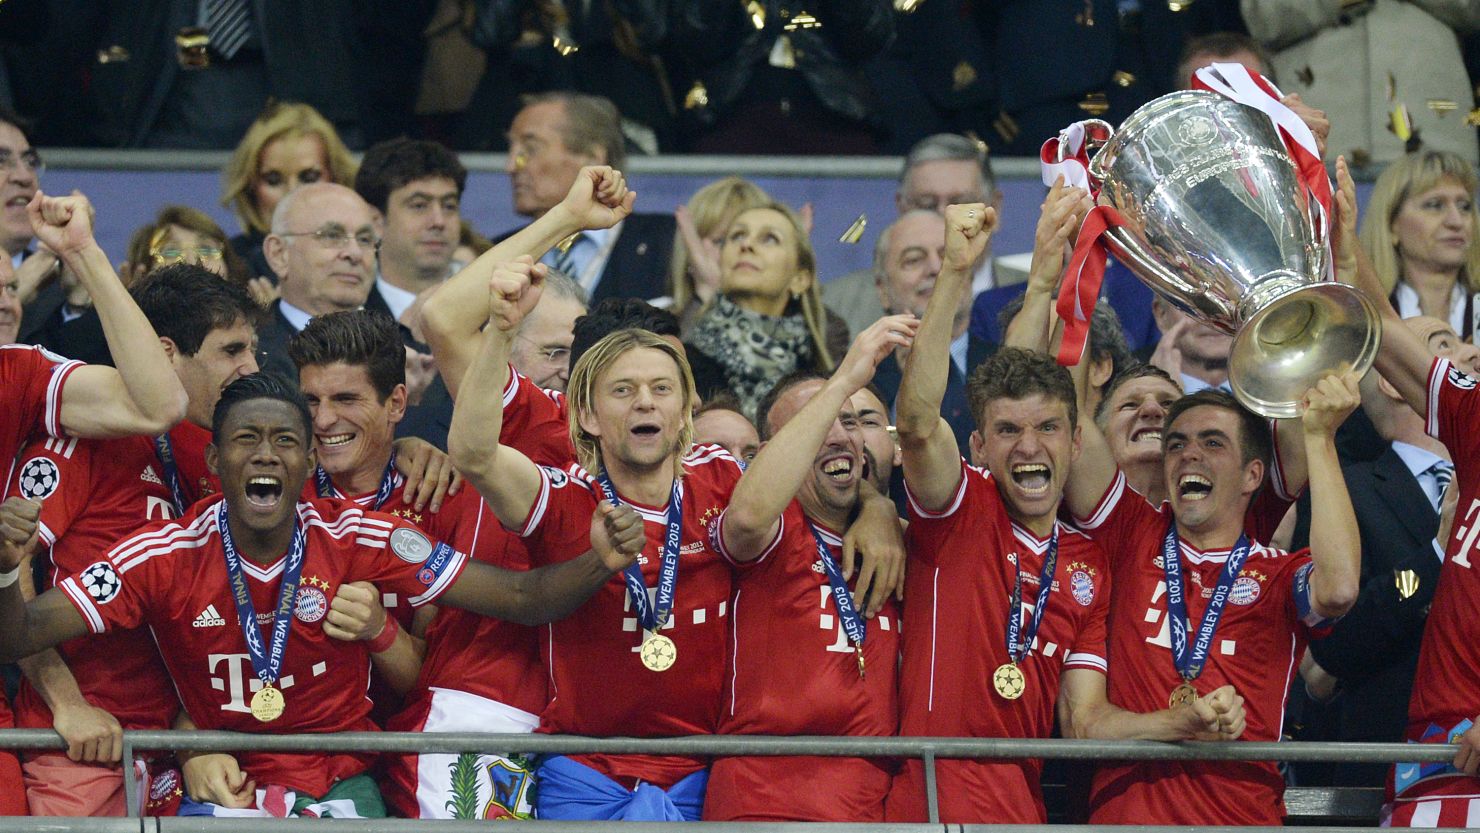 Bayern Munich captain Phillip Lahm lifts the Champions League trophy at Wembley Stadium in May